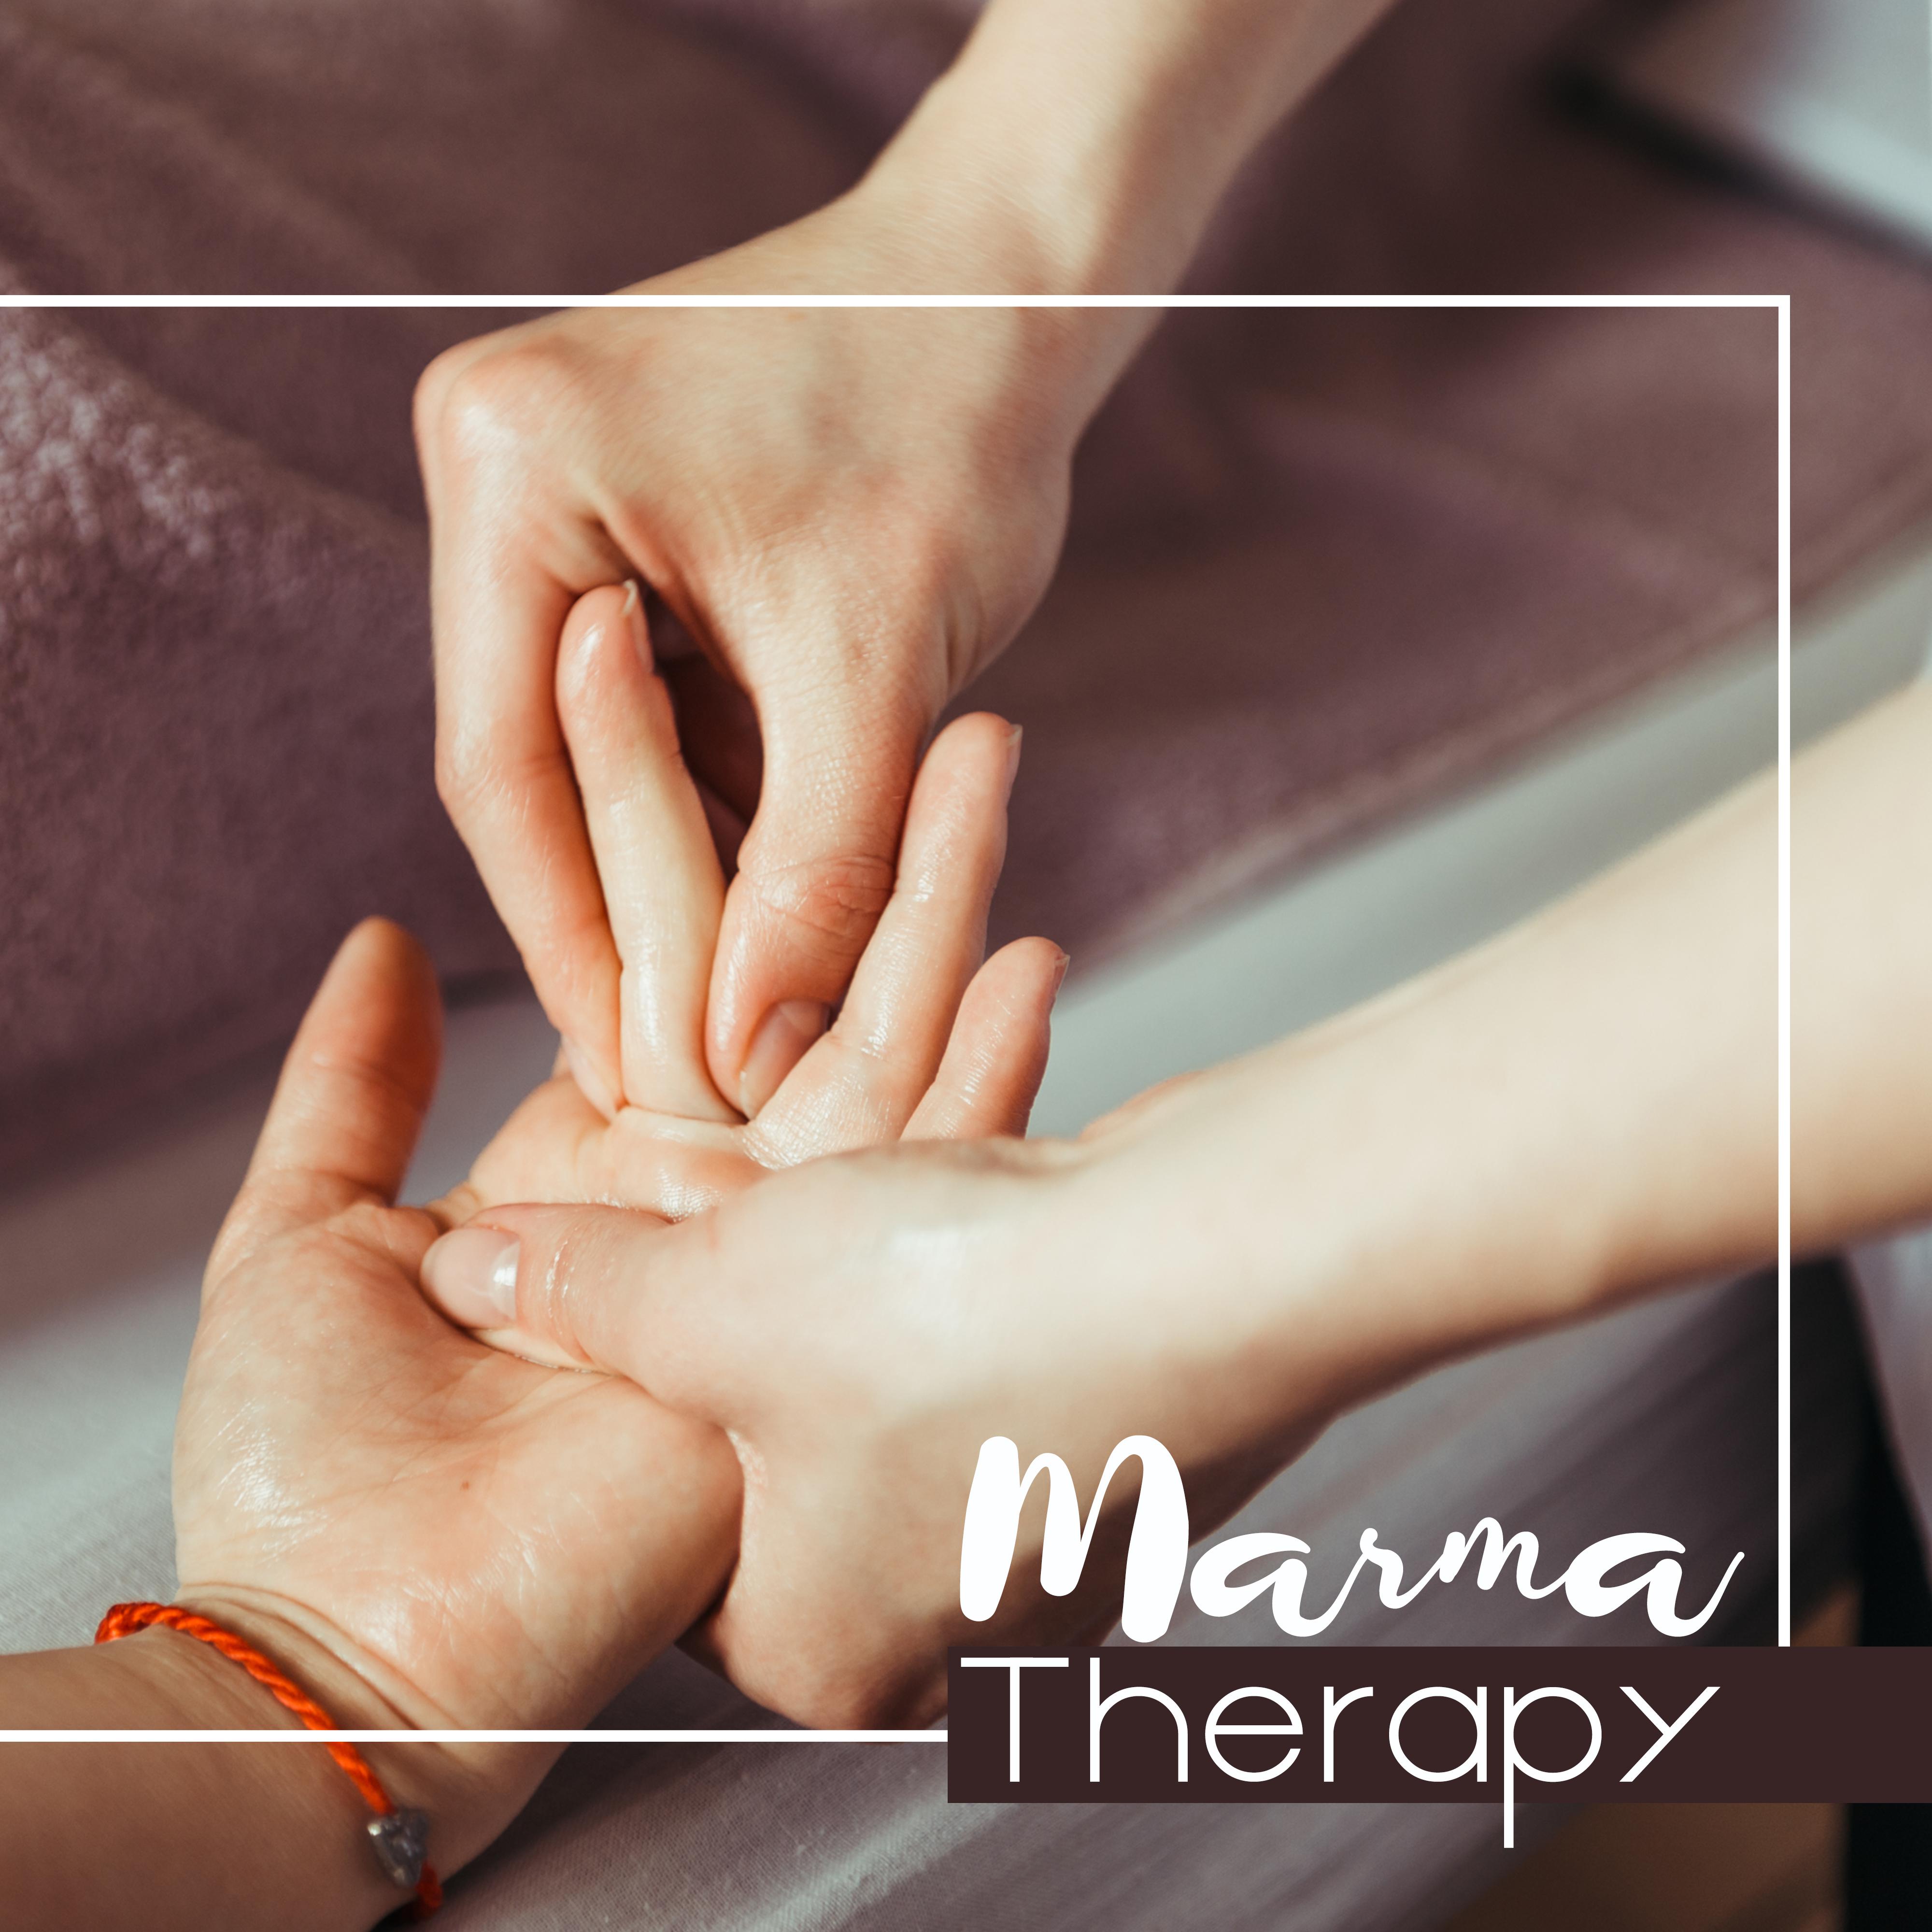 Marma Therapy: Ayurvedic Healing Technique, Stimulation of Prana Energy (Health, Peace and Balance of Mind)